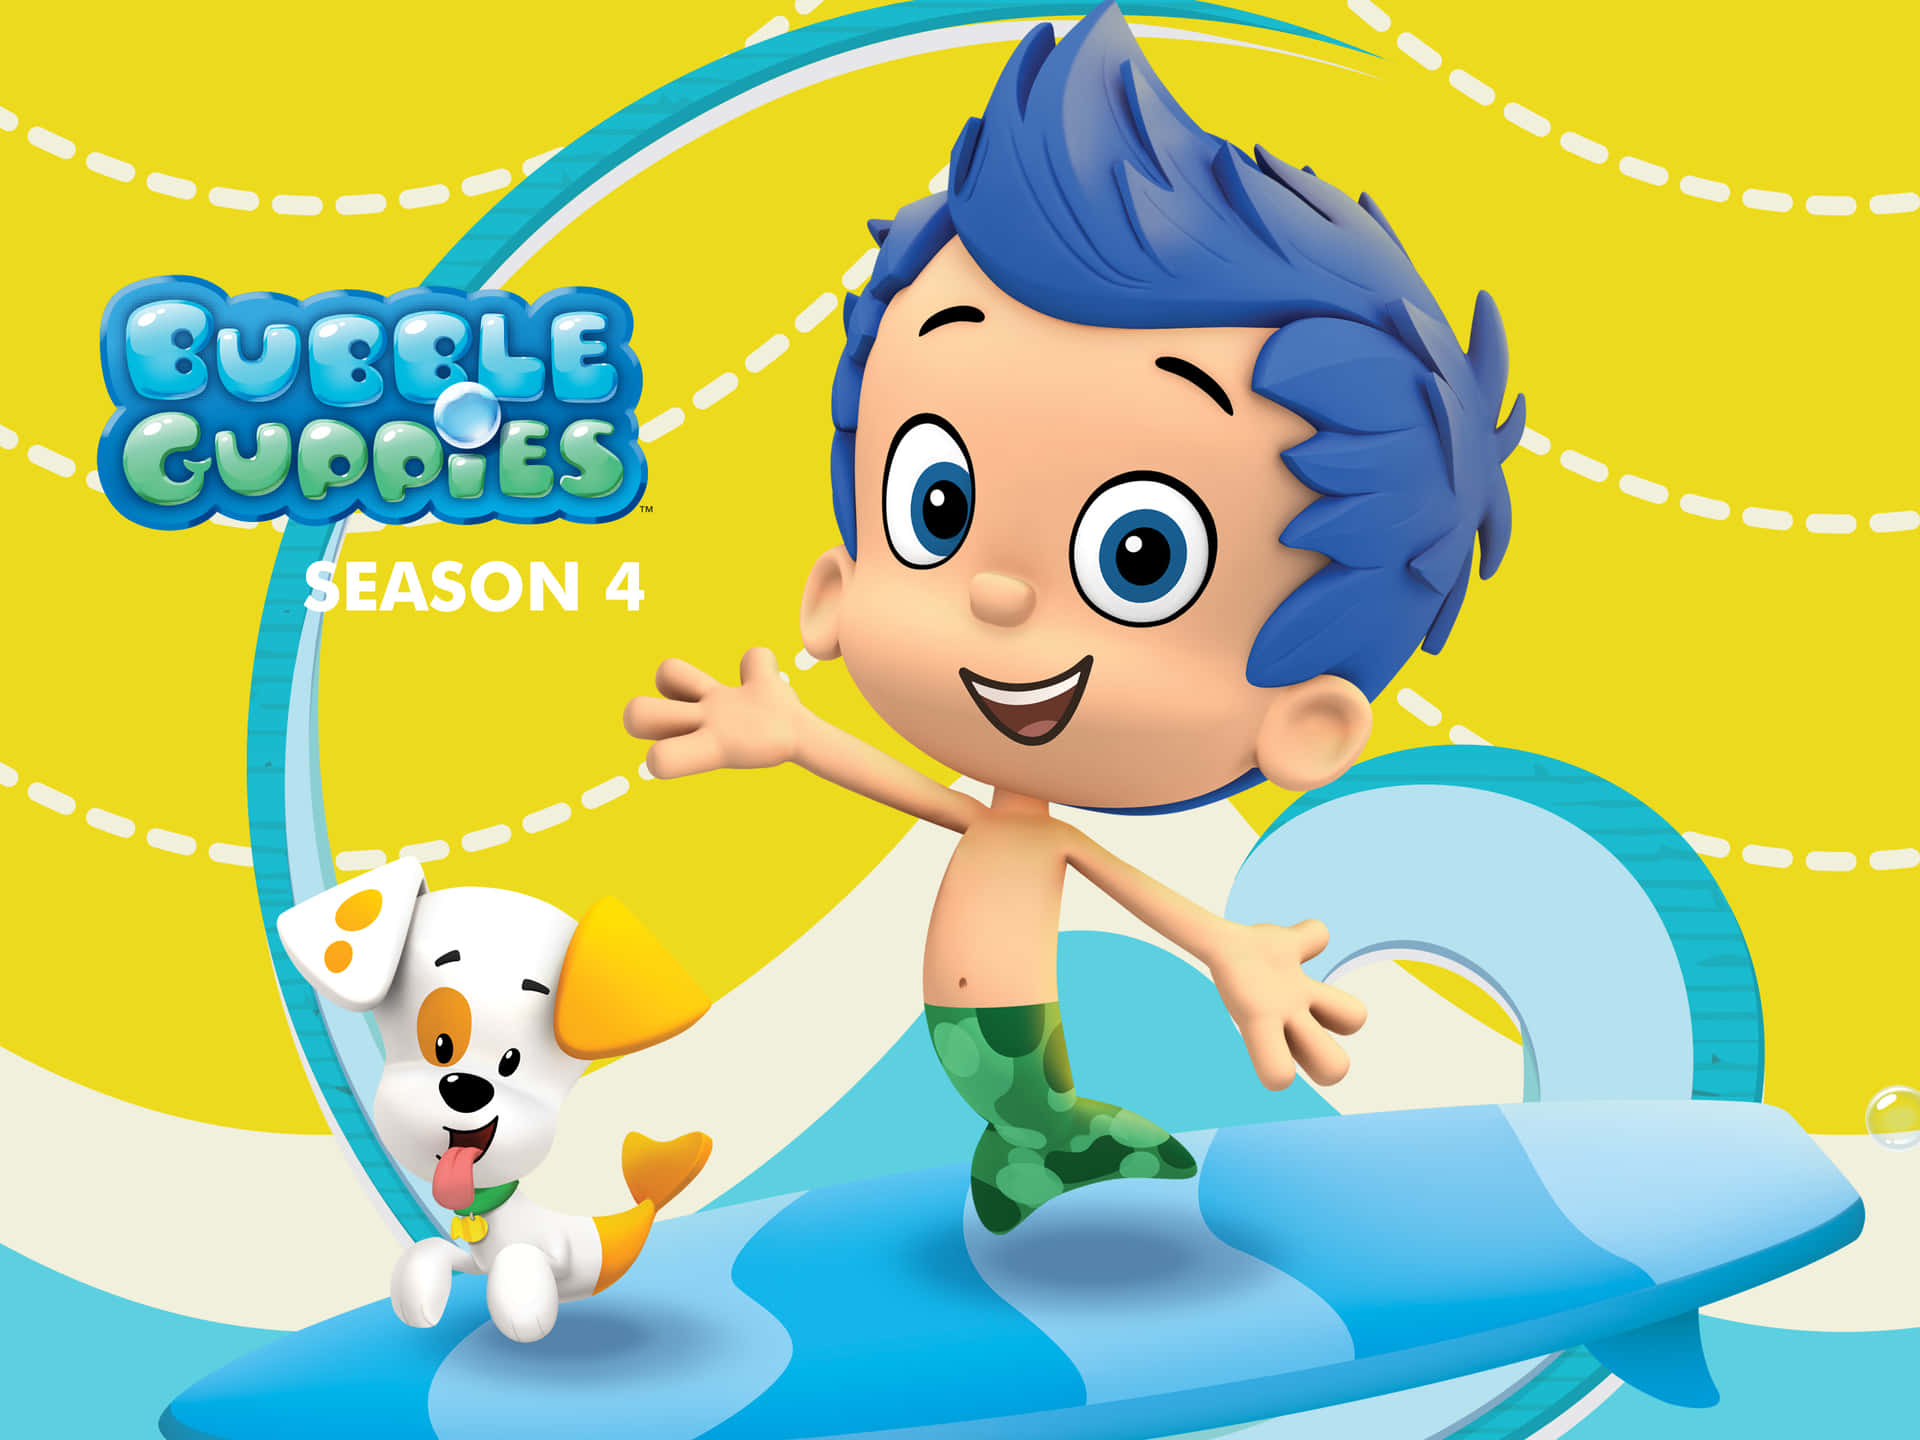 Come Join the Bubble Guppies!